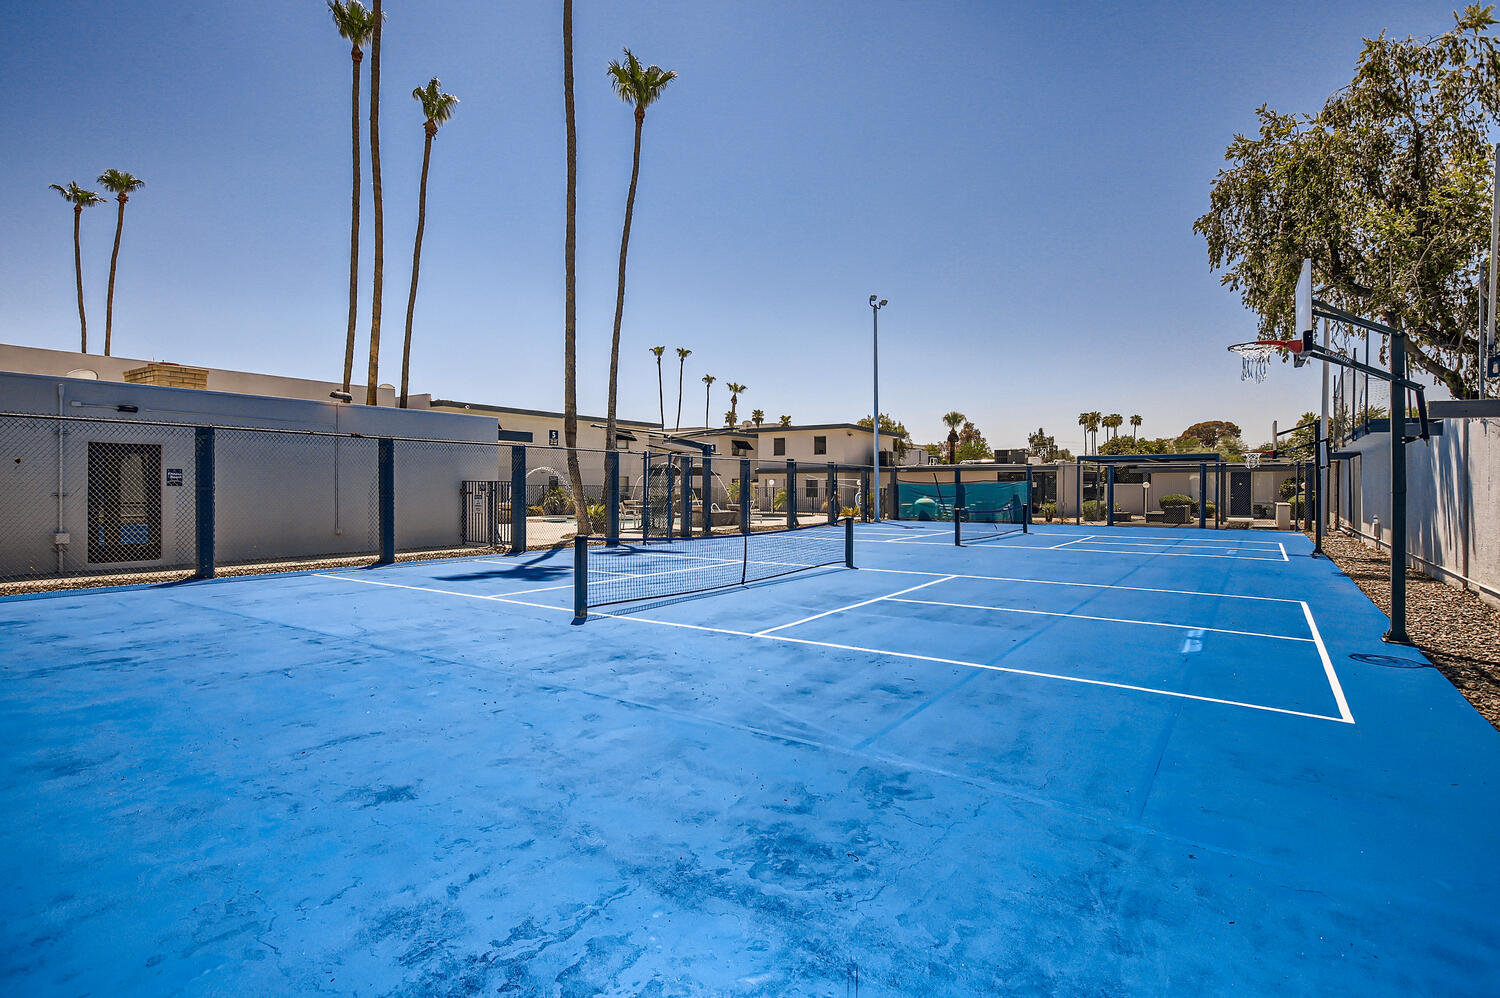 Rise Biltmore's blue outdoor tennis courts